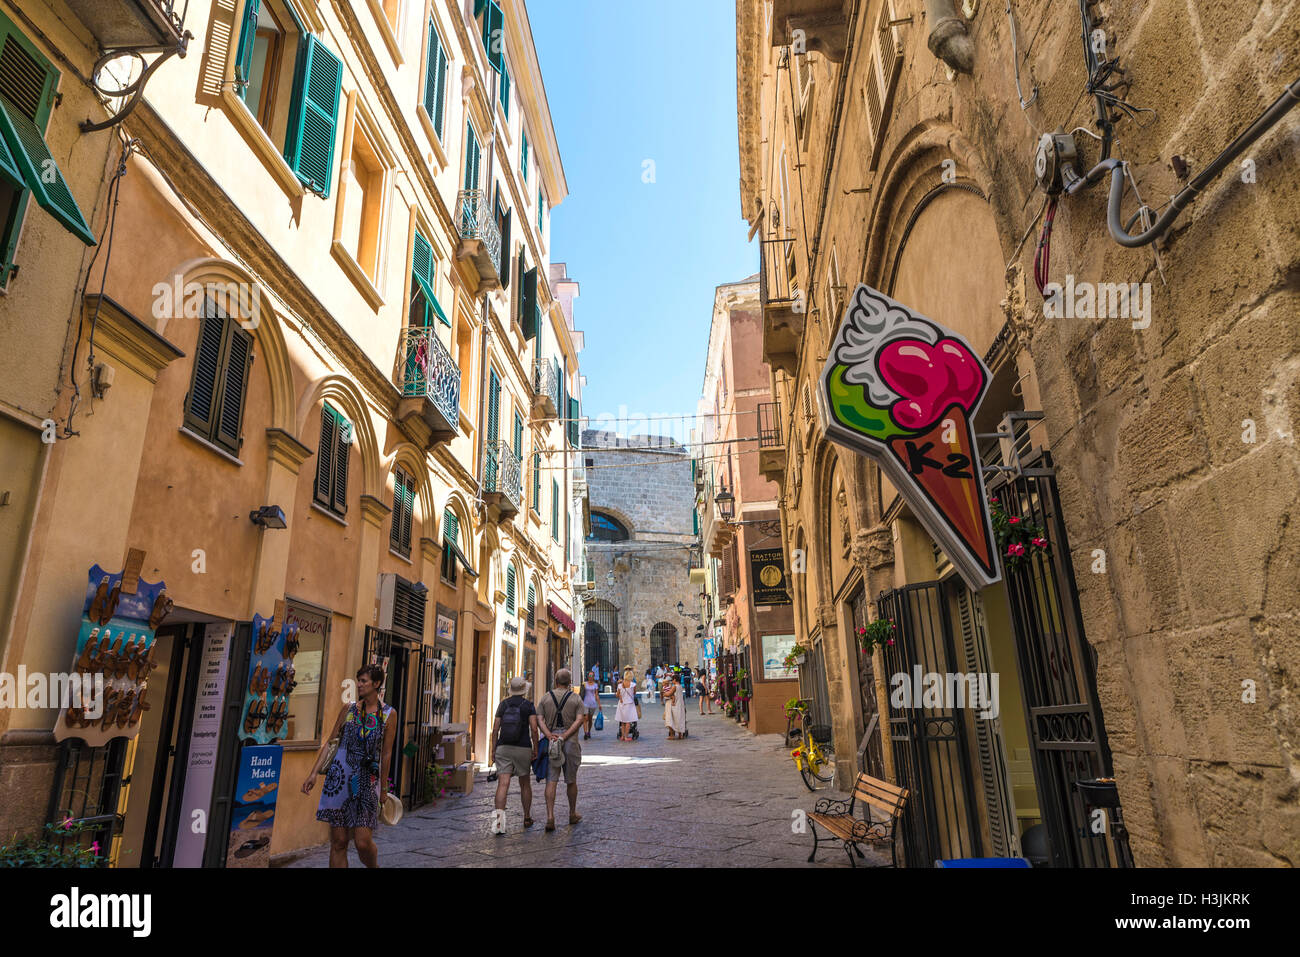 Street of the old town with people walking in Alghero, Sardinia, Italy Stock Photo